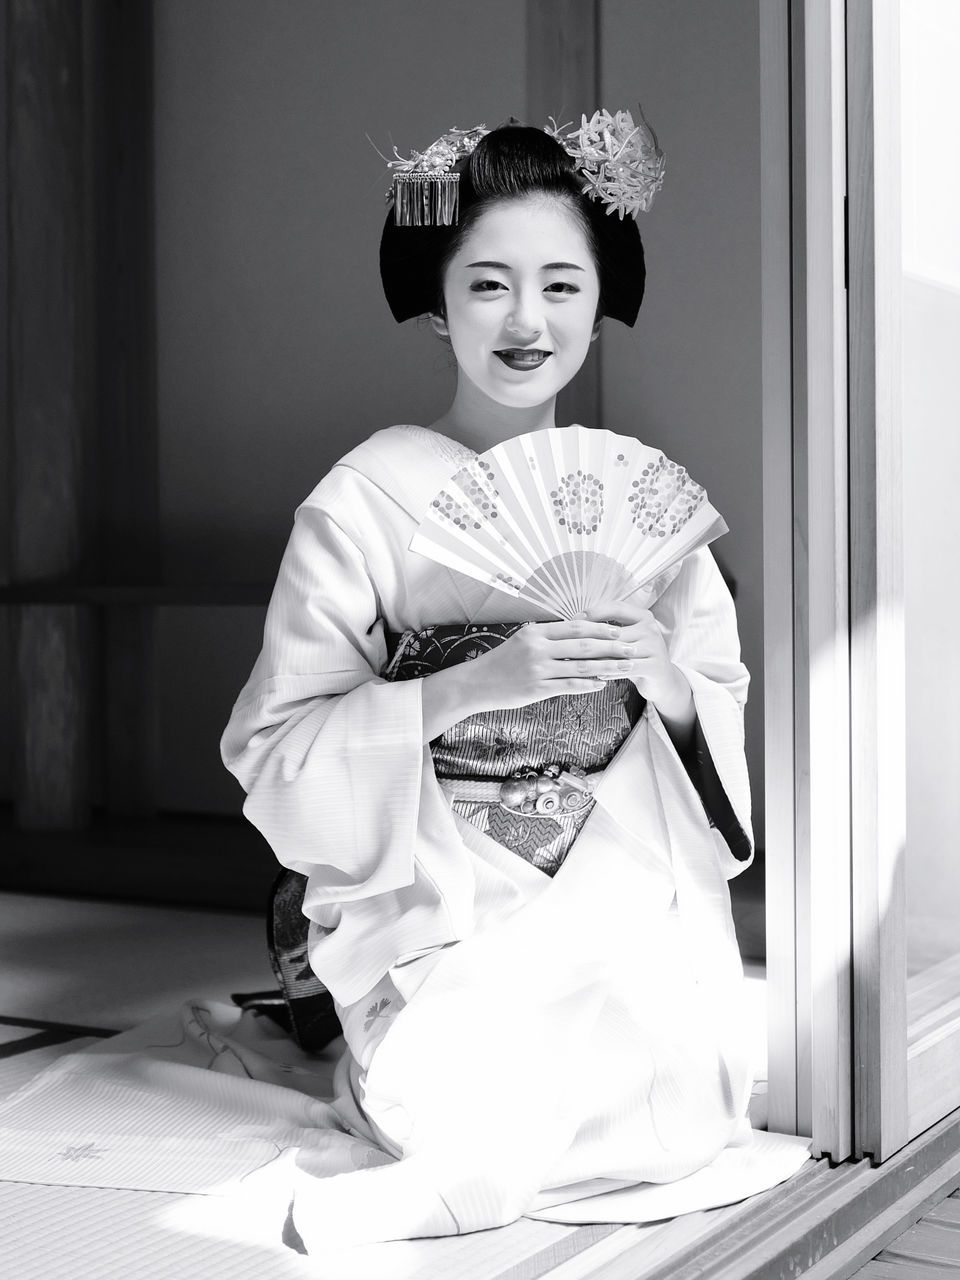 female, women, black and white, one person, adult, culture, portrait, kimono, young adult, clothing, white, monochrome photography, smiling, person, looking at camera, monochrome, fashion, indoors, traditional clothing, happiness, lifestyles, robe, architecture, arts culture and entertainment, bun, emotion, elegance, child, occupation